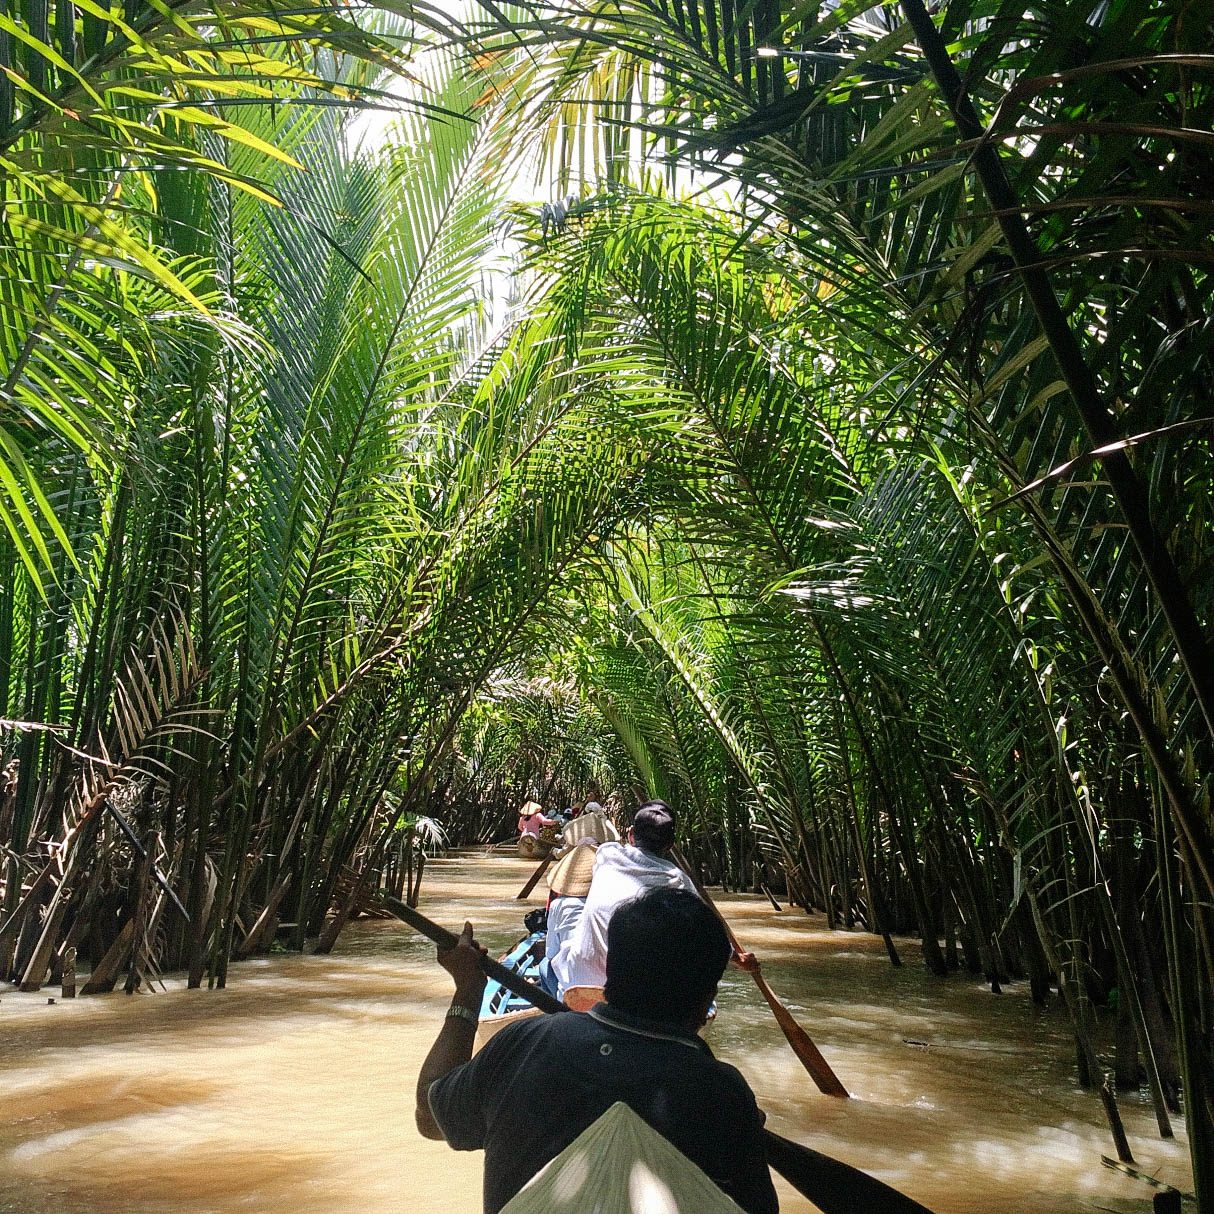 Mekong Delta tour. Photo provided by Andrea Javier  